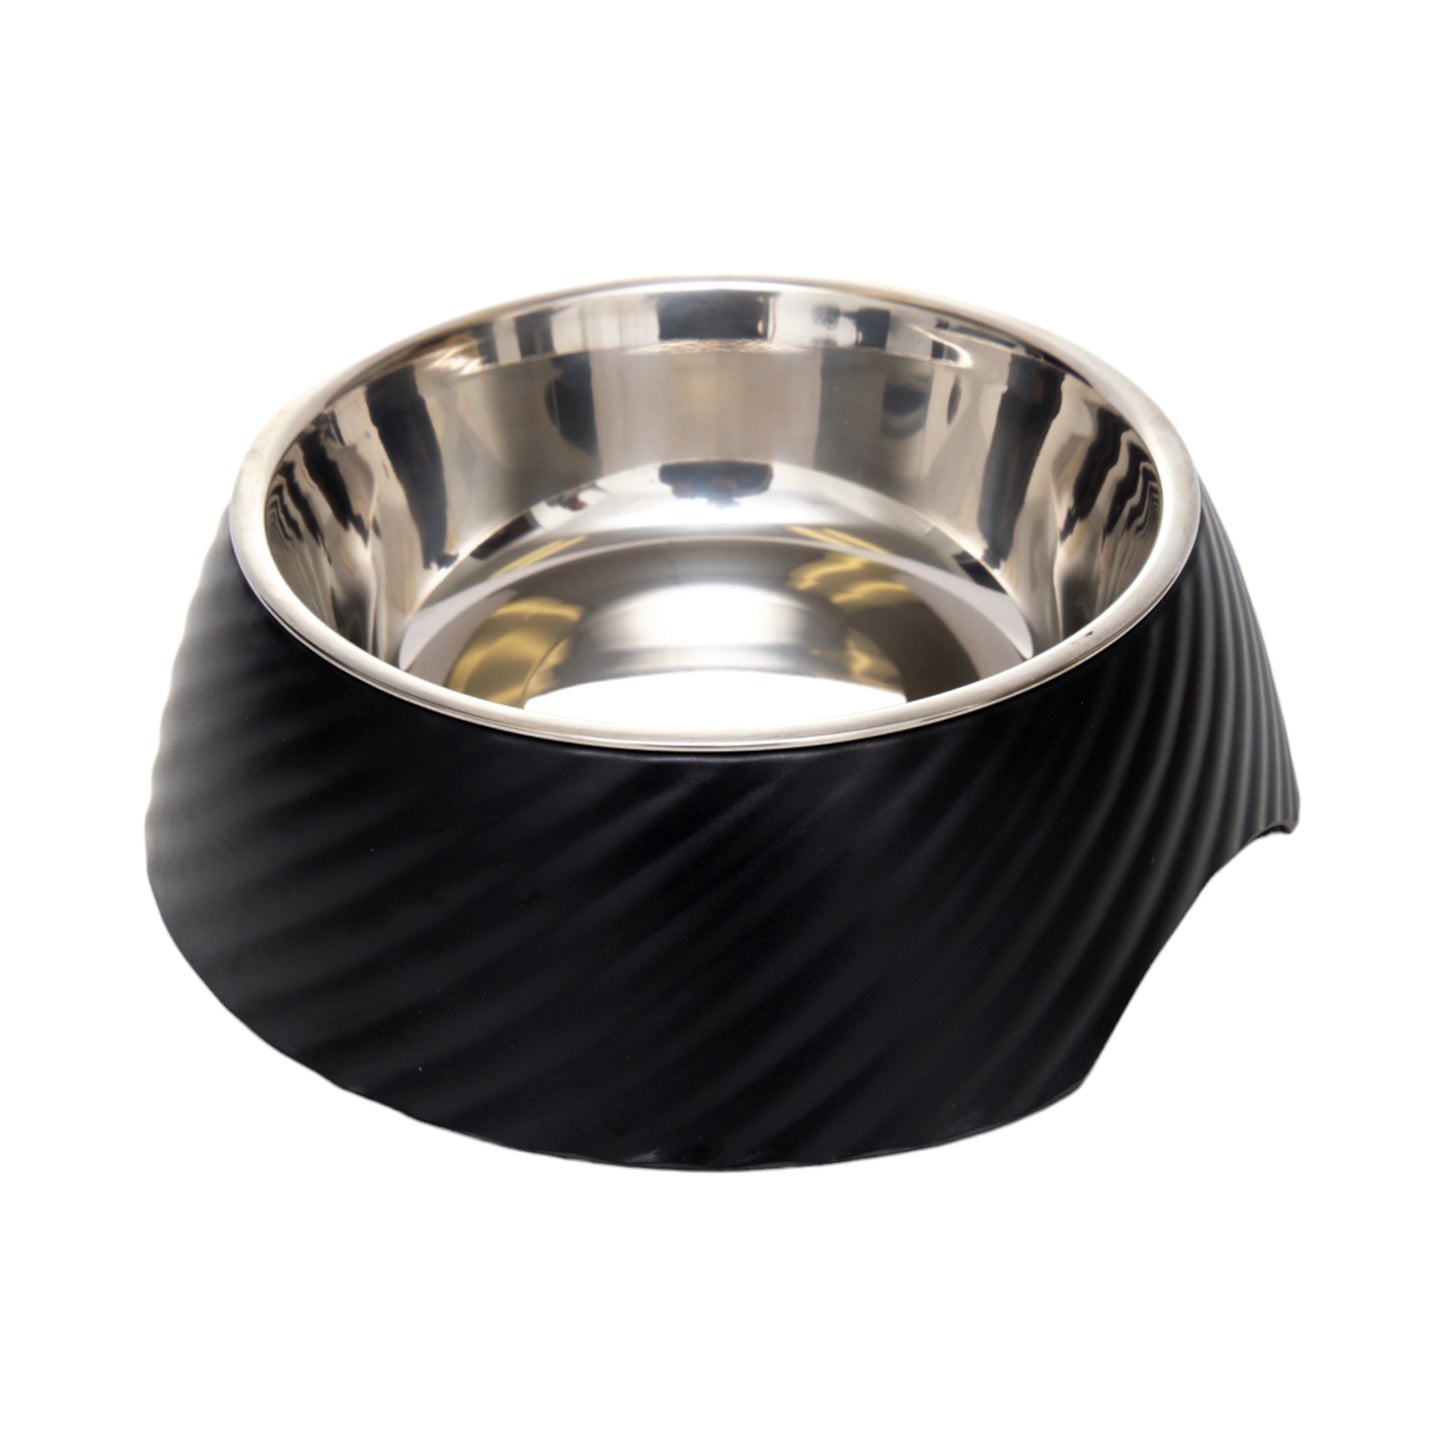 Country Living Set of 2 Twill Round Melamine Stainless Steel Dog Bowls (Black)